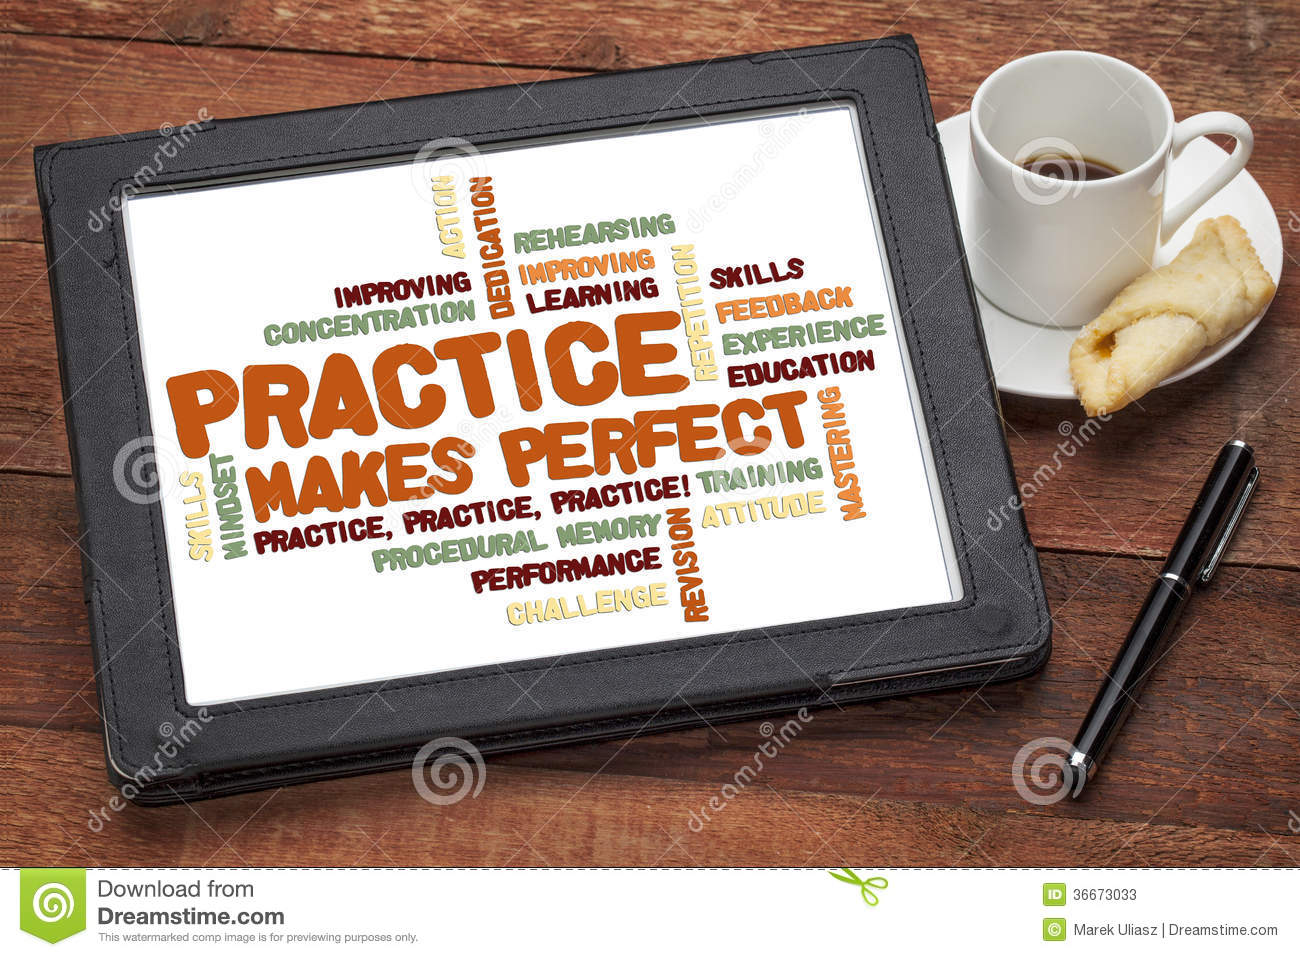 Practice Makes Perfect   Related Word Cloud On A Digital Tablet With A    